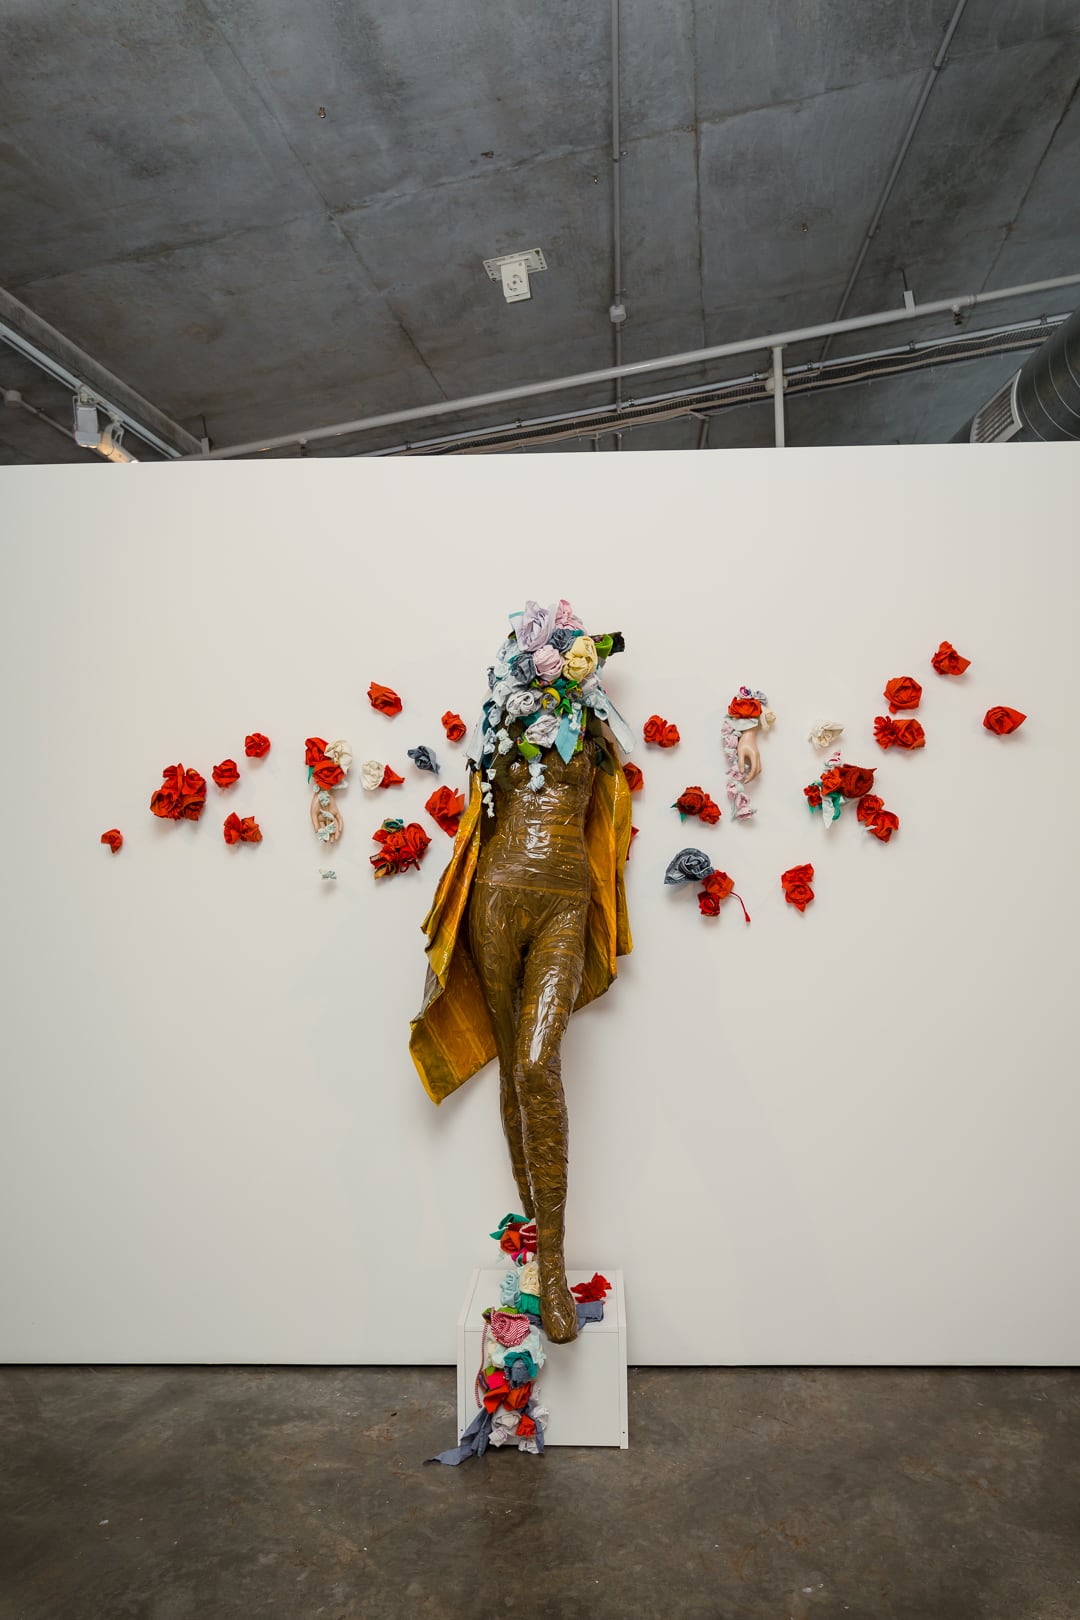 Image 04: L-R Marikit Santiago *Mary Manananggal* 2018, second-hand children's garments, towels, linen, found mannequin, dress-maker pins, thread, hot glue gun, packing tape, masking tape, dimensions variable. Image: Document Photography. Courtesy of the artist and Verge Gallery.